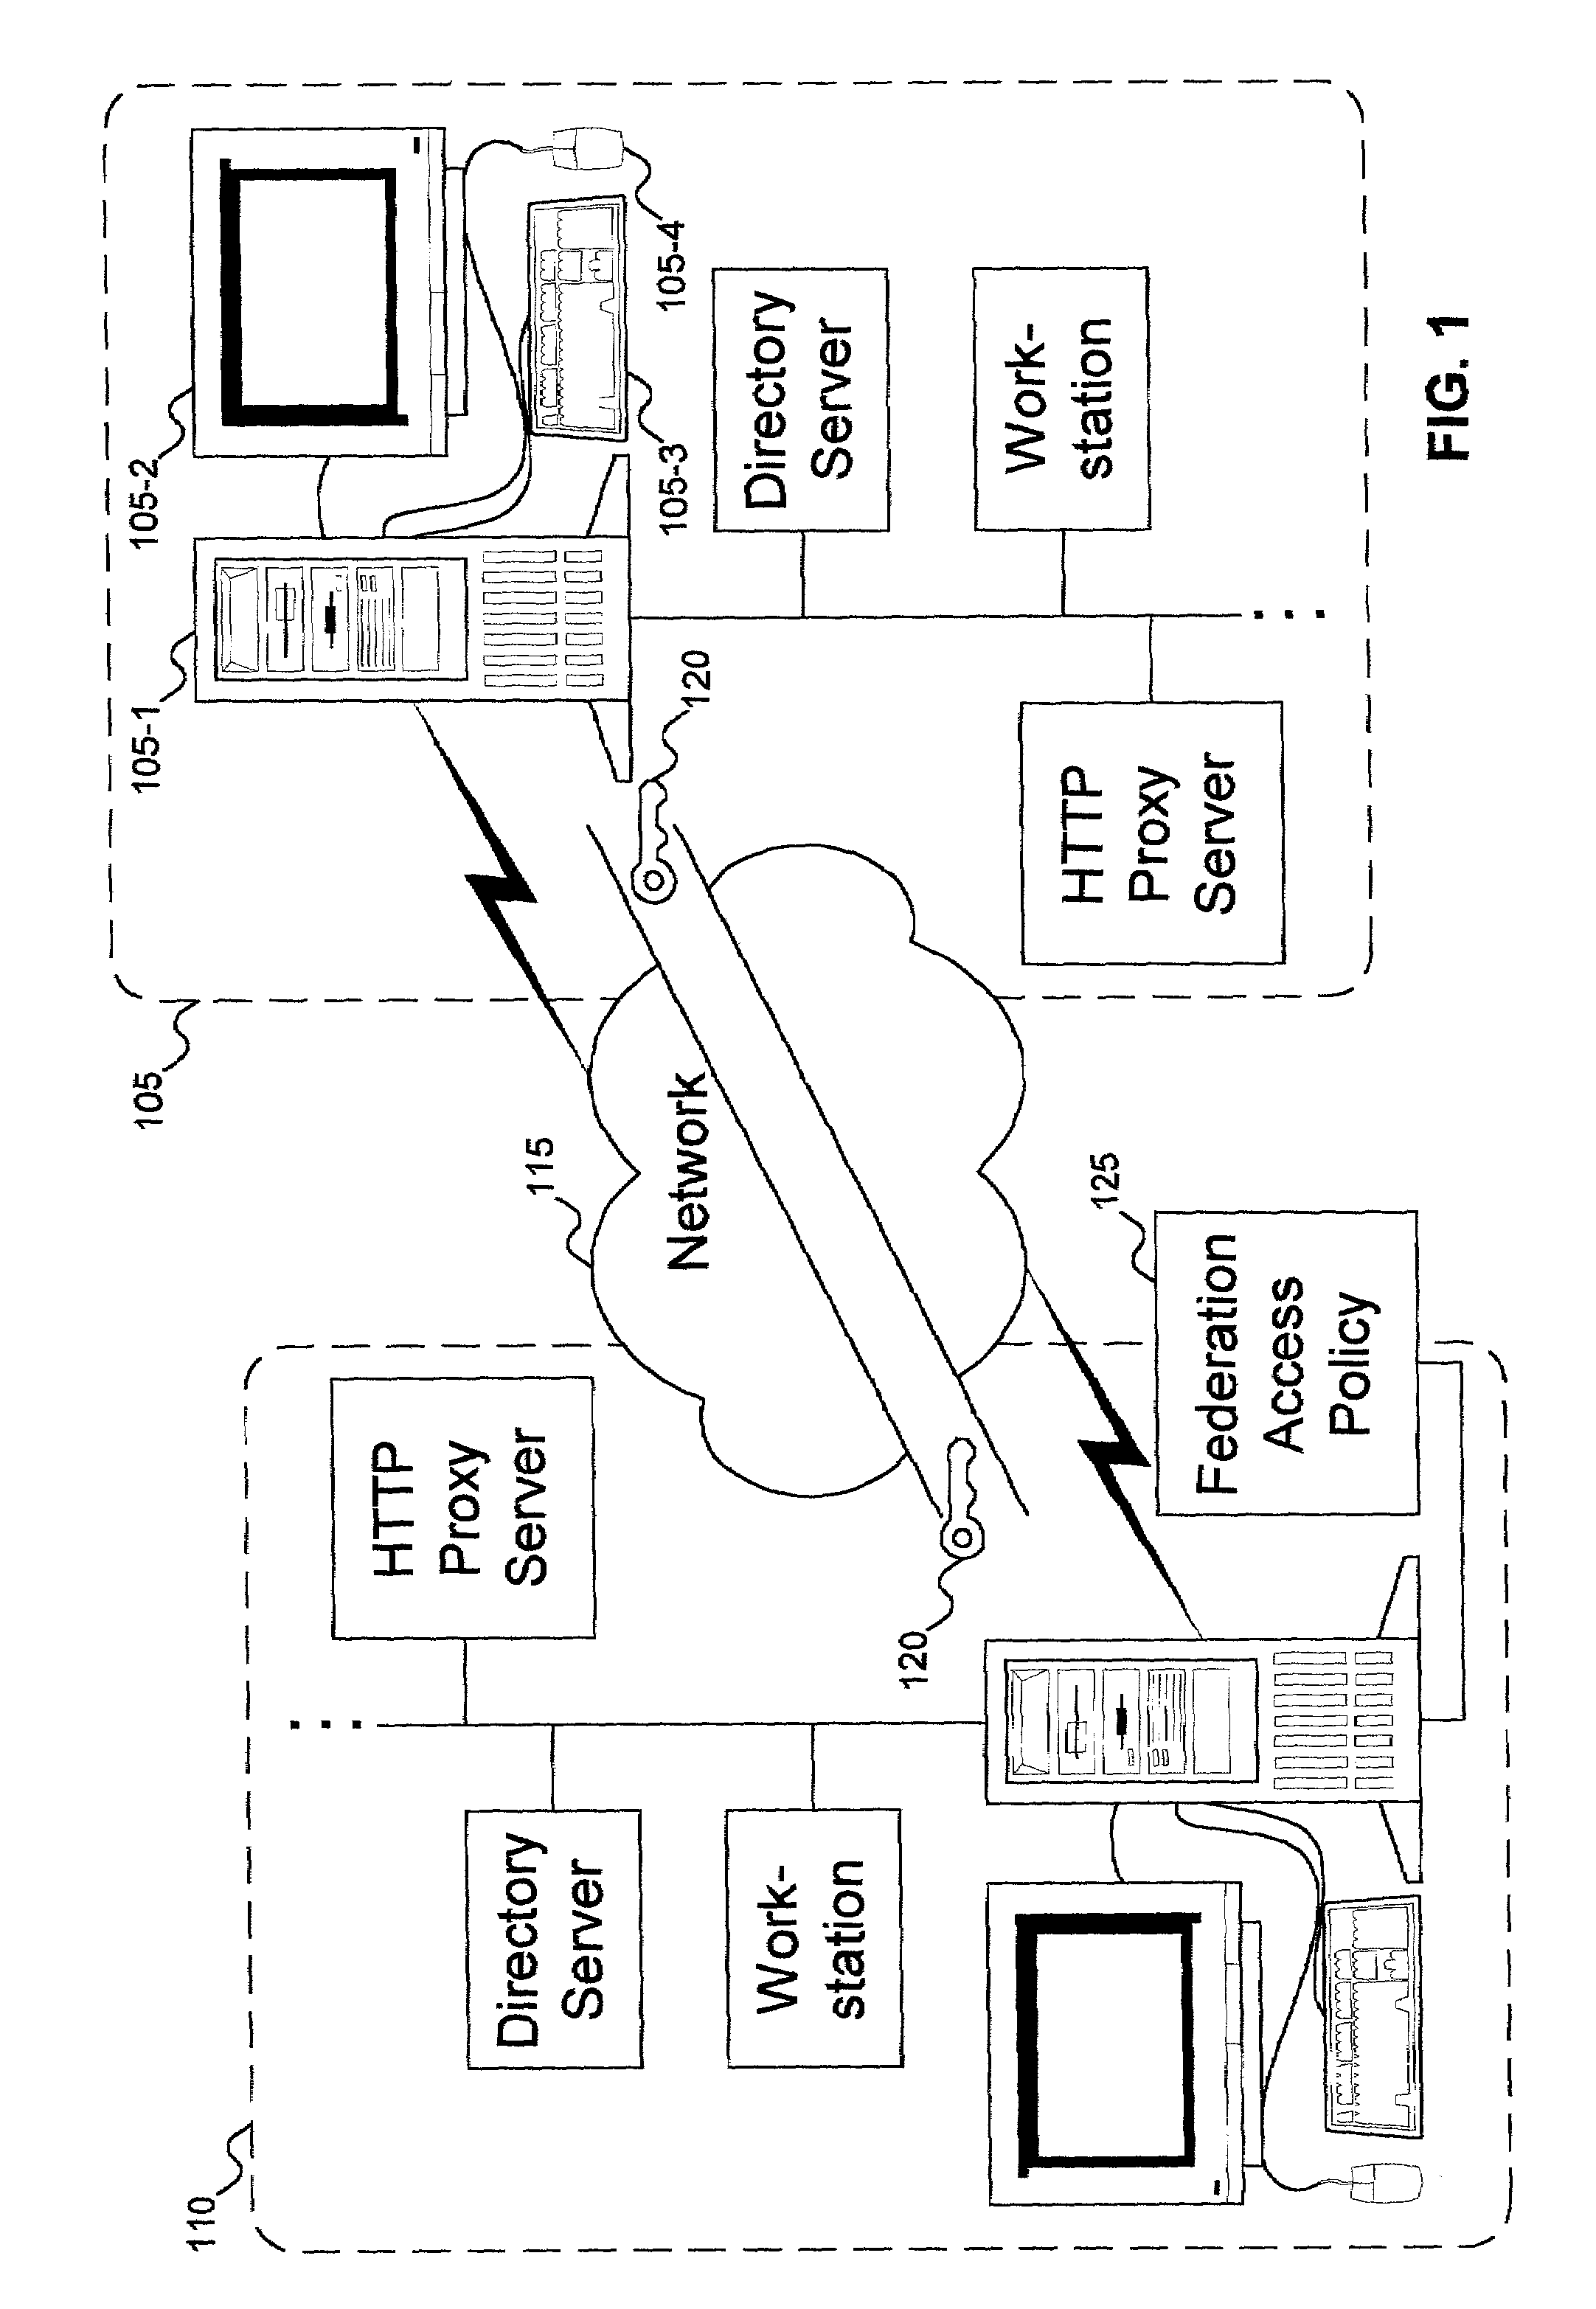 Cross domain authentication and security services using proxies for HTTP access